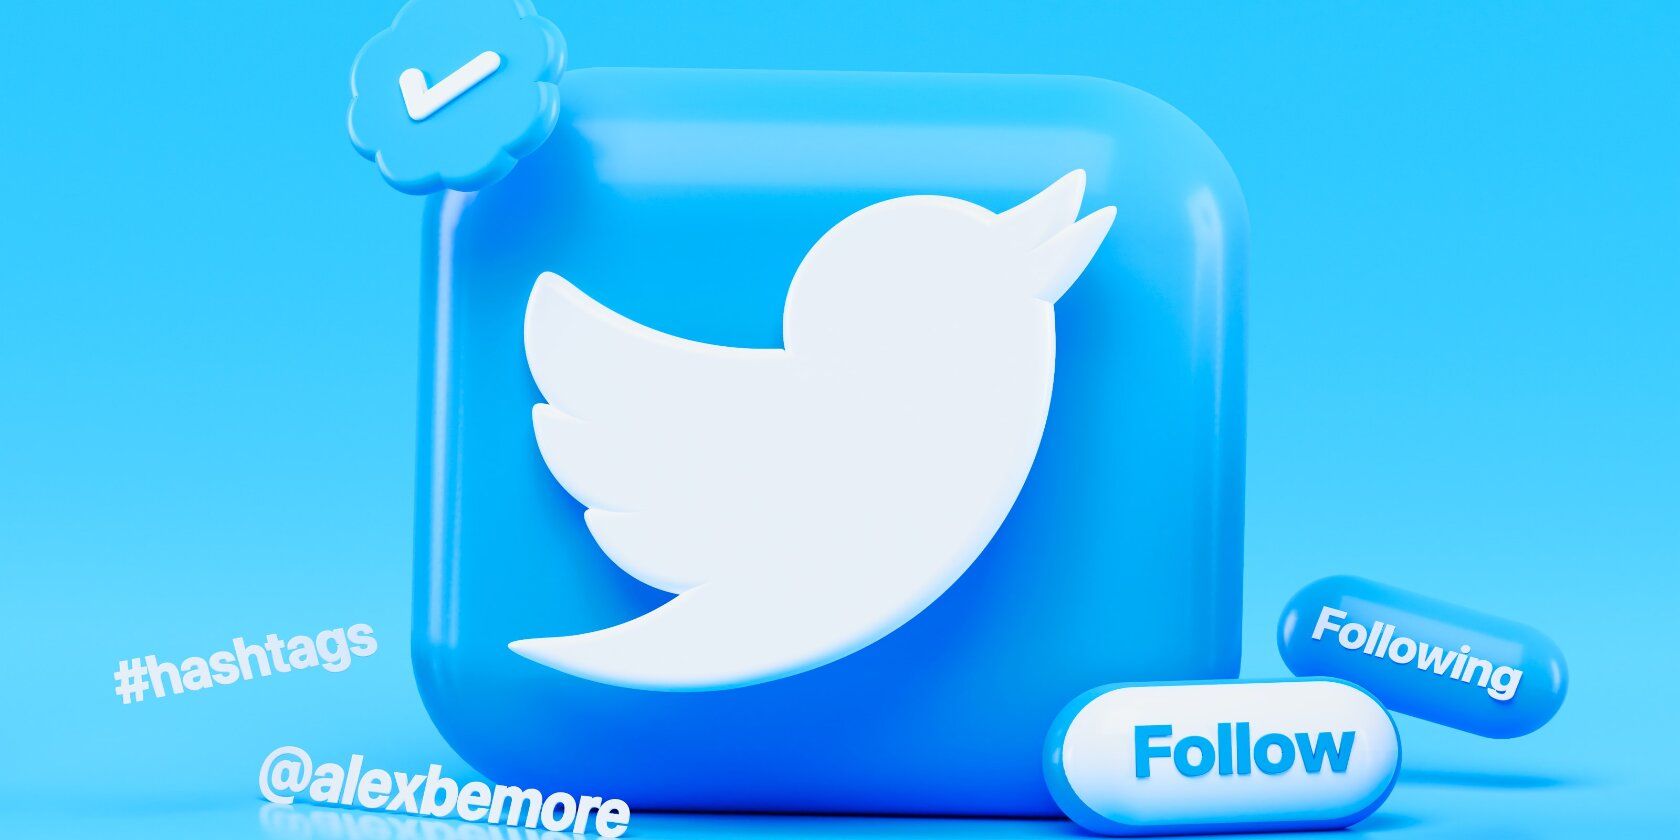 Blue Twitter logo including hashtags and following buttons. 